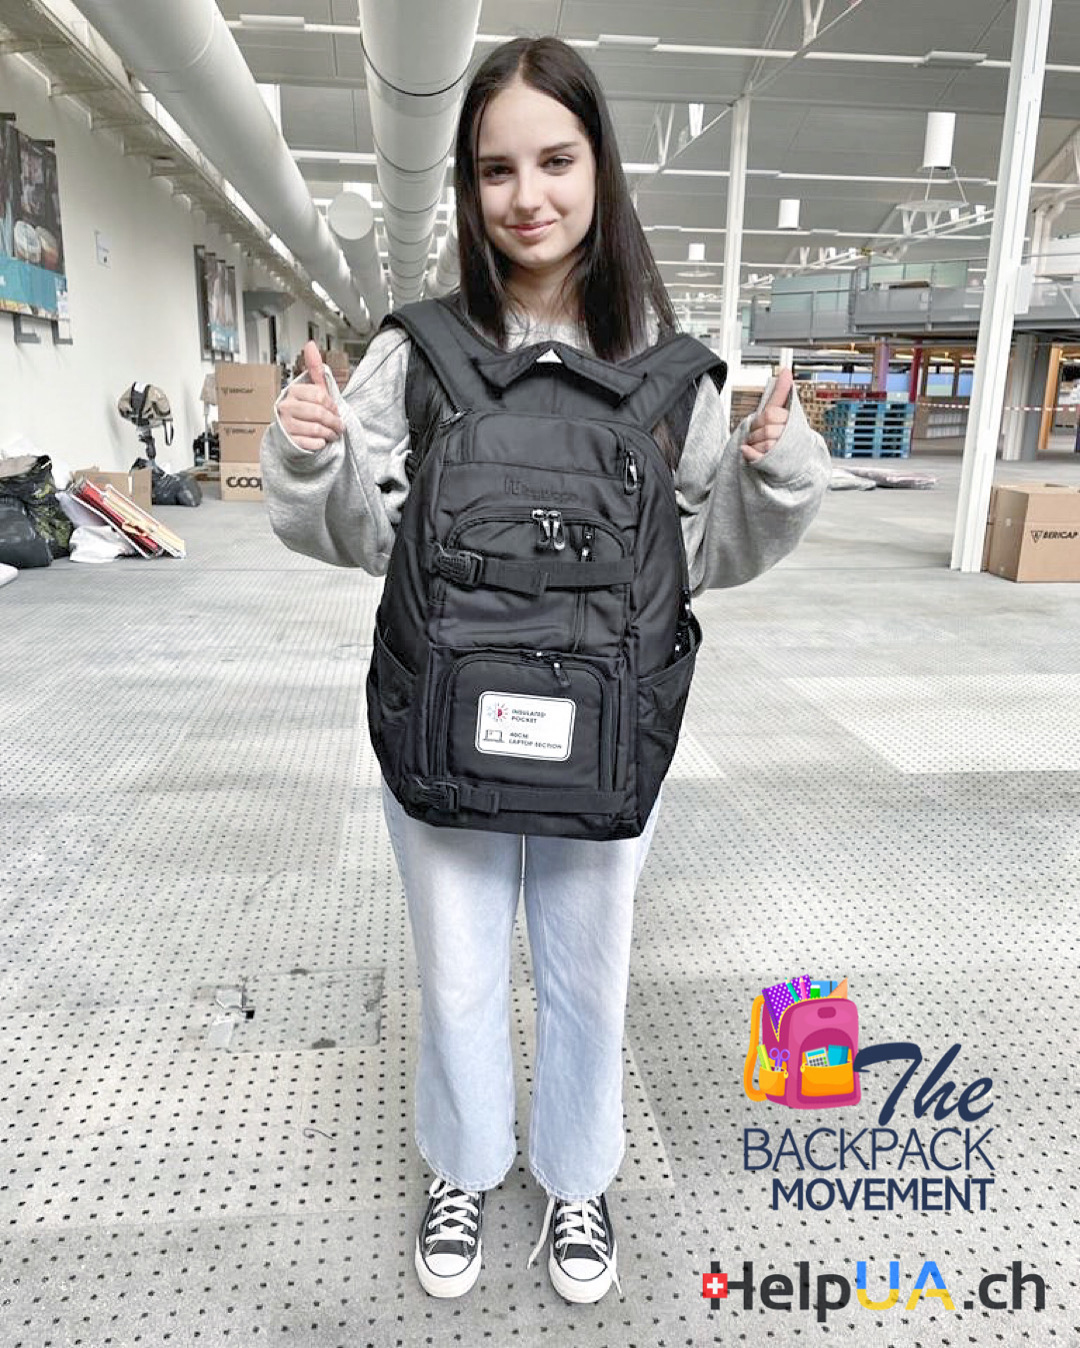 We are happy to support The backpack movement in helping Ukrainian children in Switzerland to get ready for school.